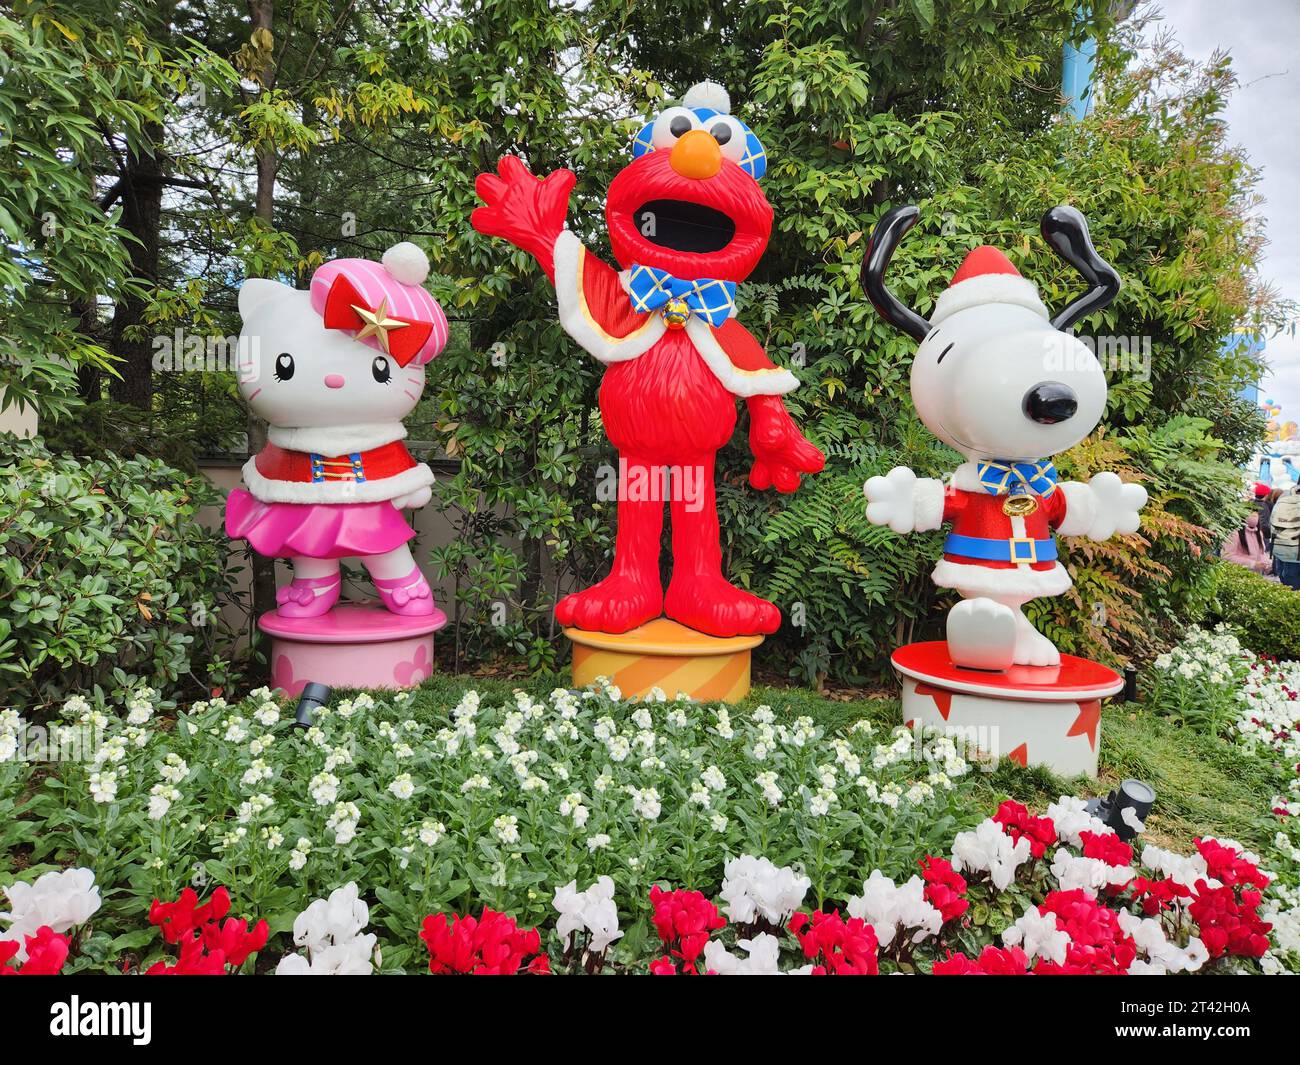 Famous Elmo the Muppet, Snoopy Dog and Hello Kitty statues in Universal Studios, Japan Stock Photo